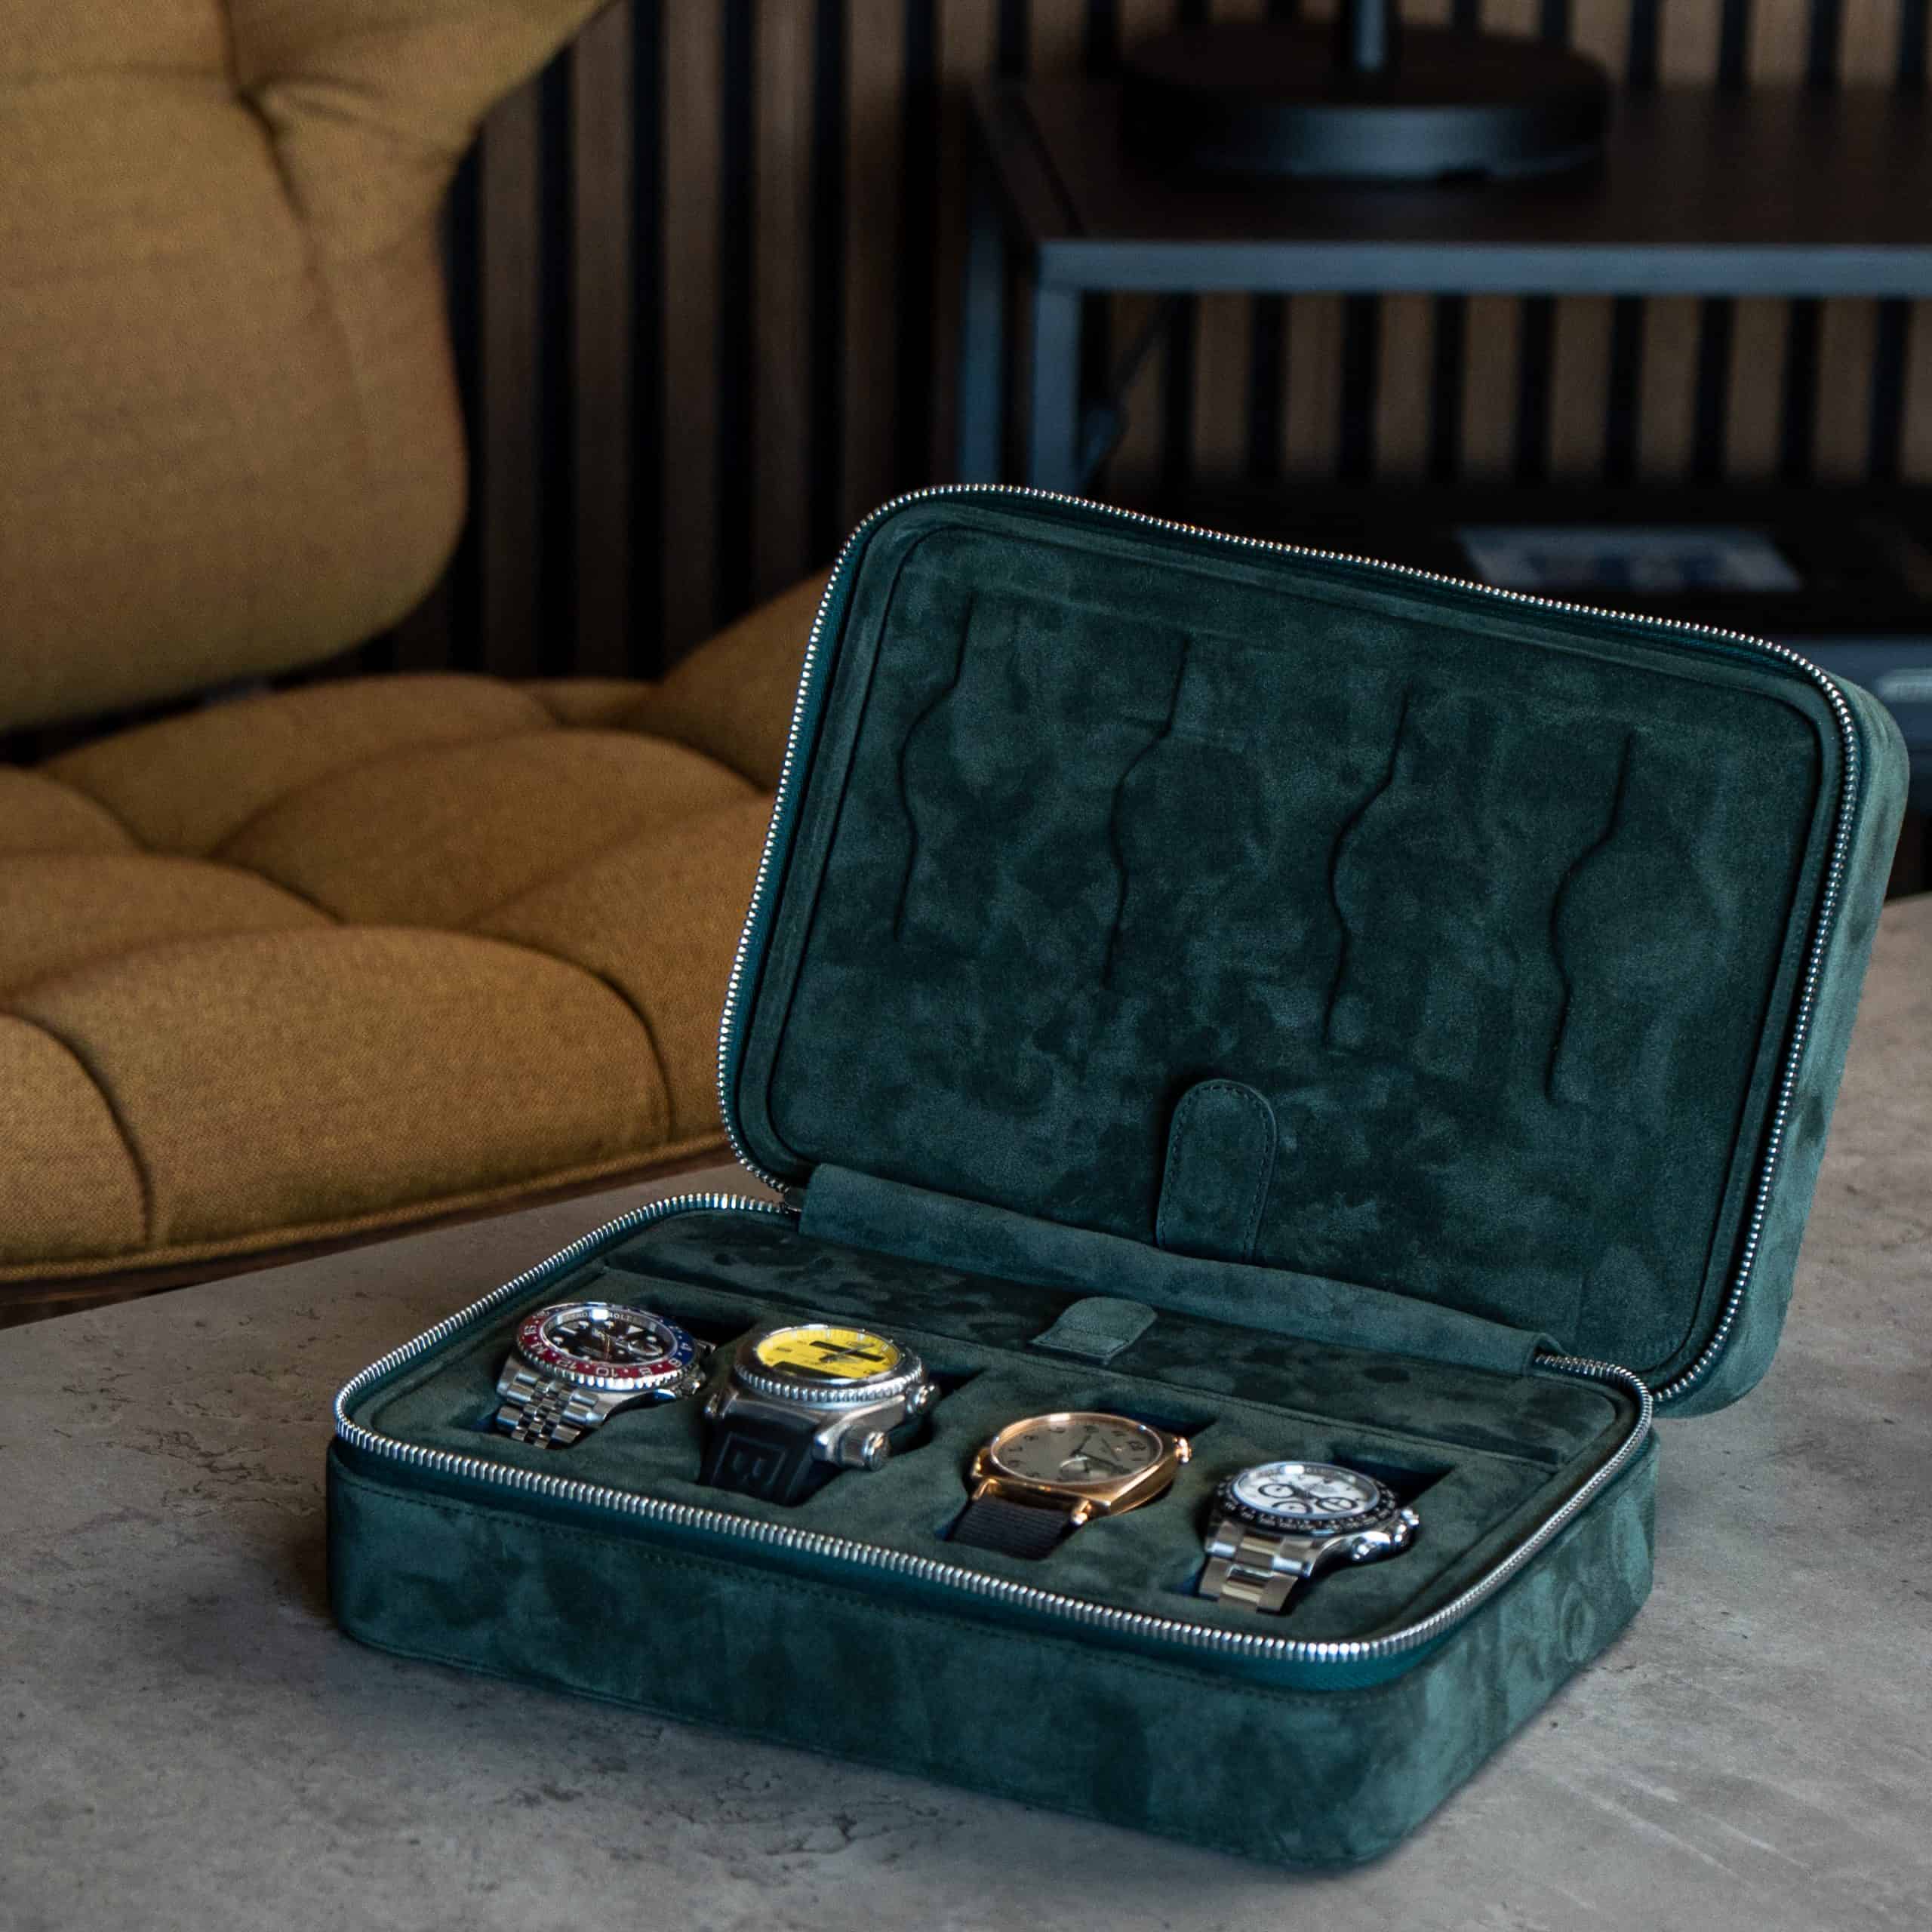 luxury watch box in green, Forest Green 8 Slot Watch Box DailyWatch, italian suede leather, handmade, travel safely with eight watches, 